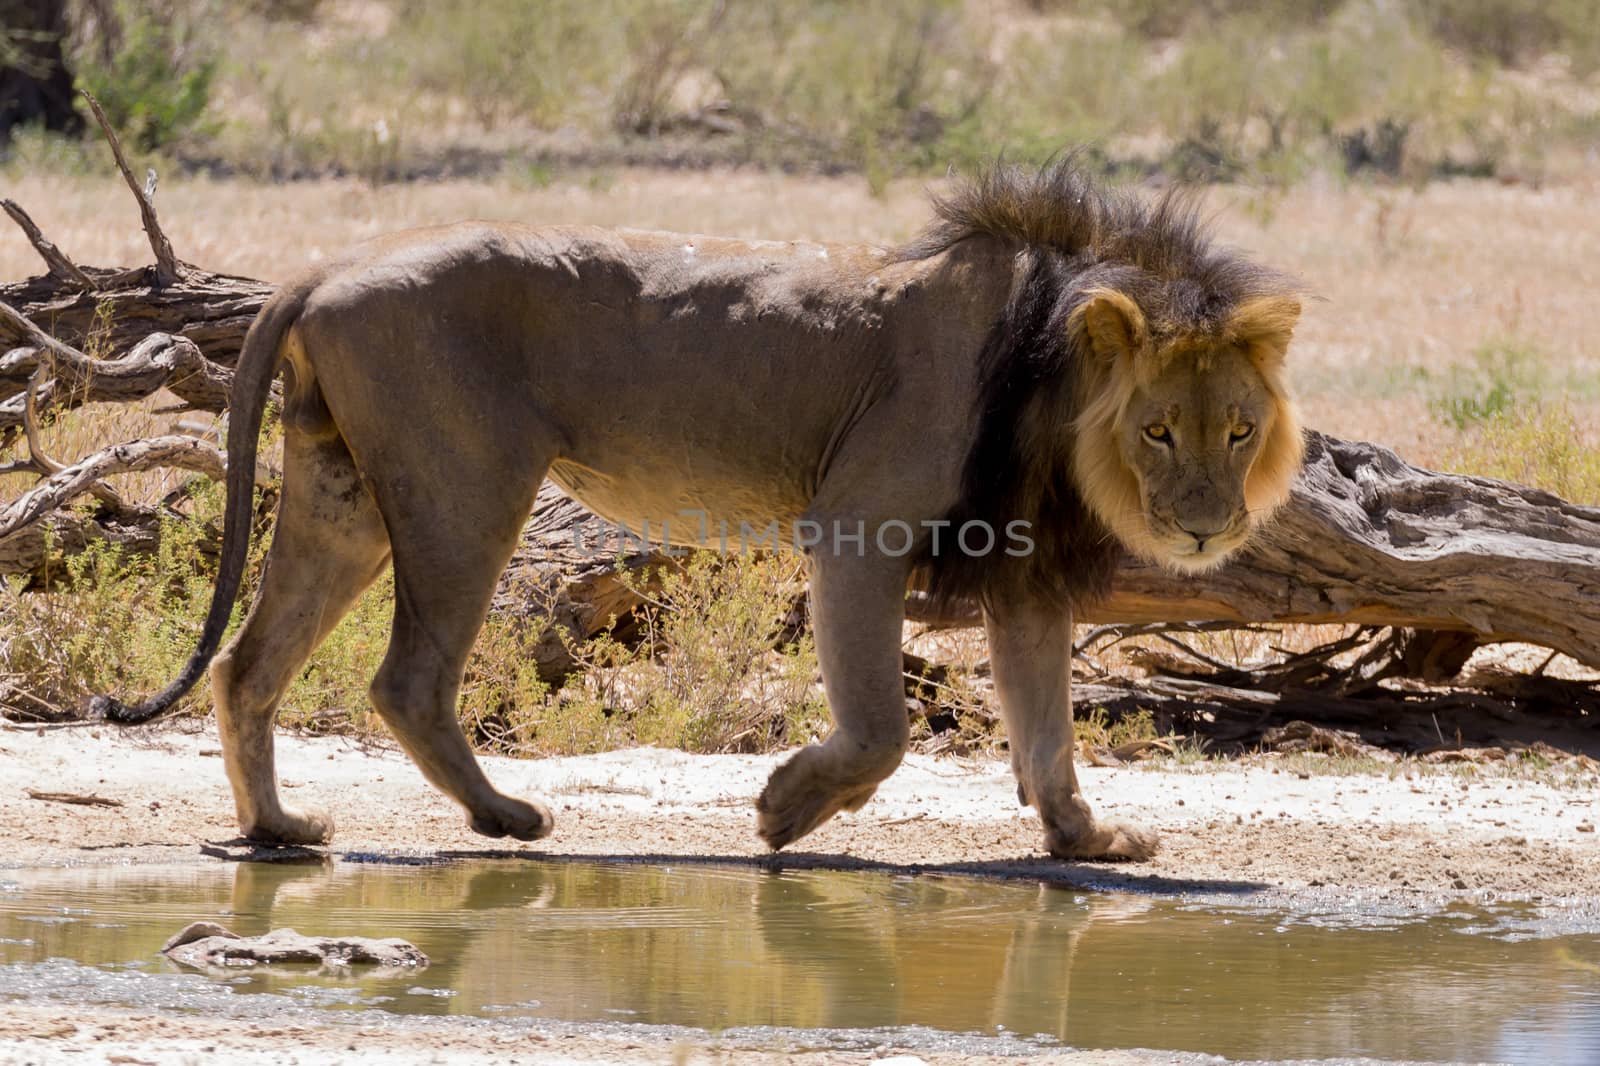 A lion from Kgalagadi National Park, South Africa